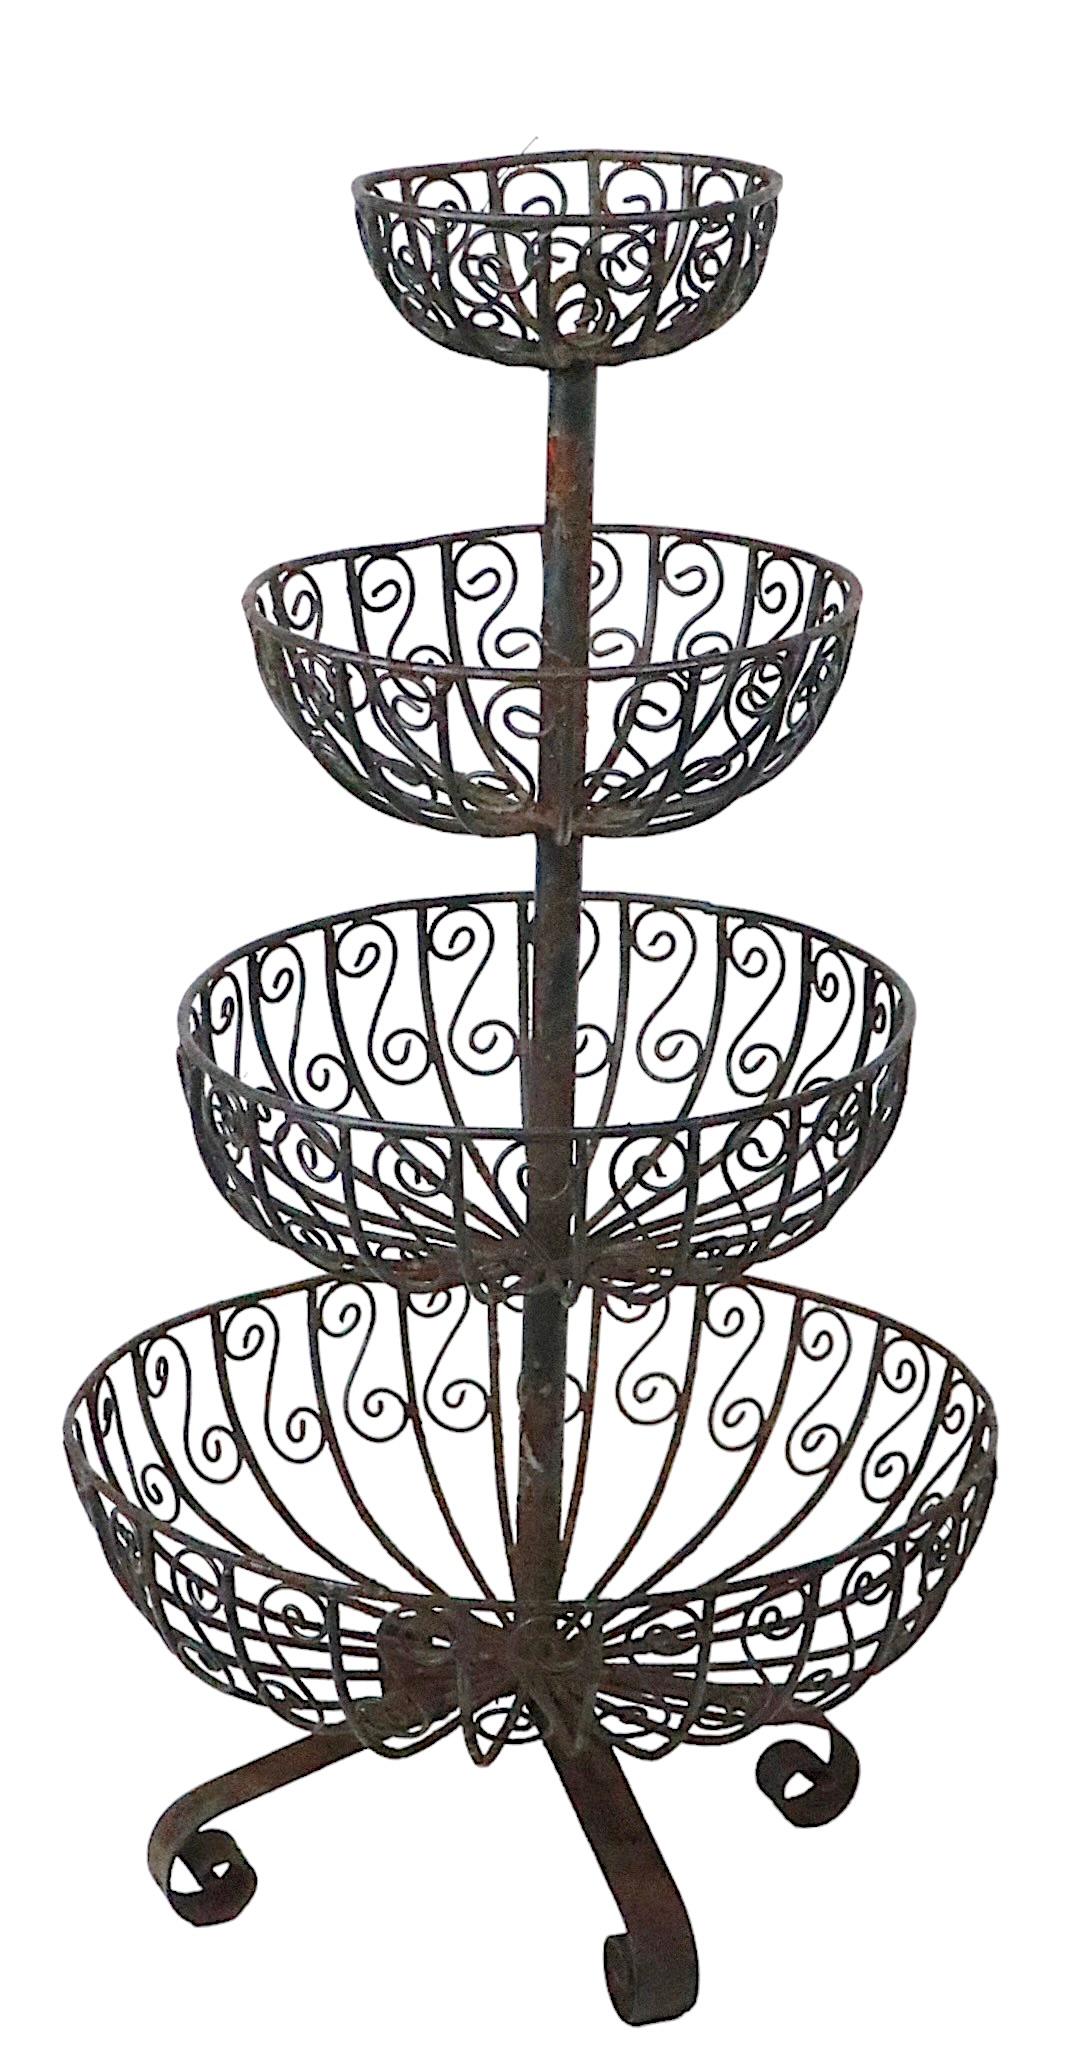 French Provincial Mid Century Four Tier Wrought Iron Wire Work Planter with Graduated Size Basins For Sale